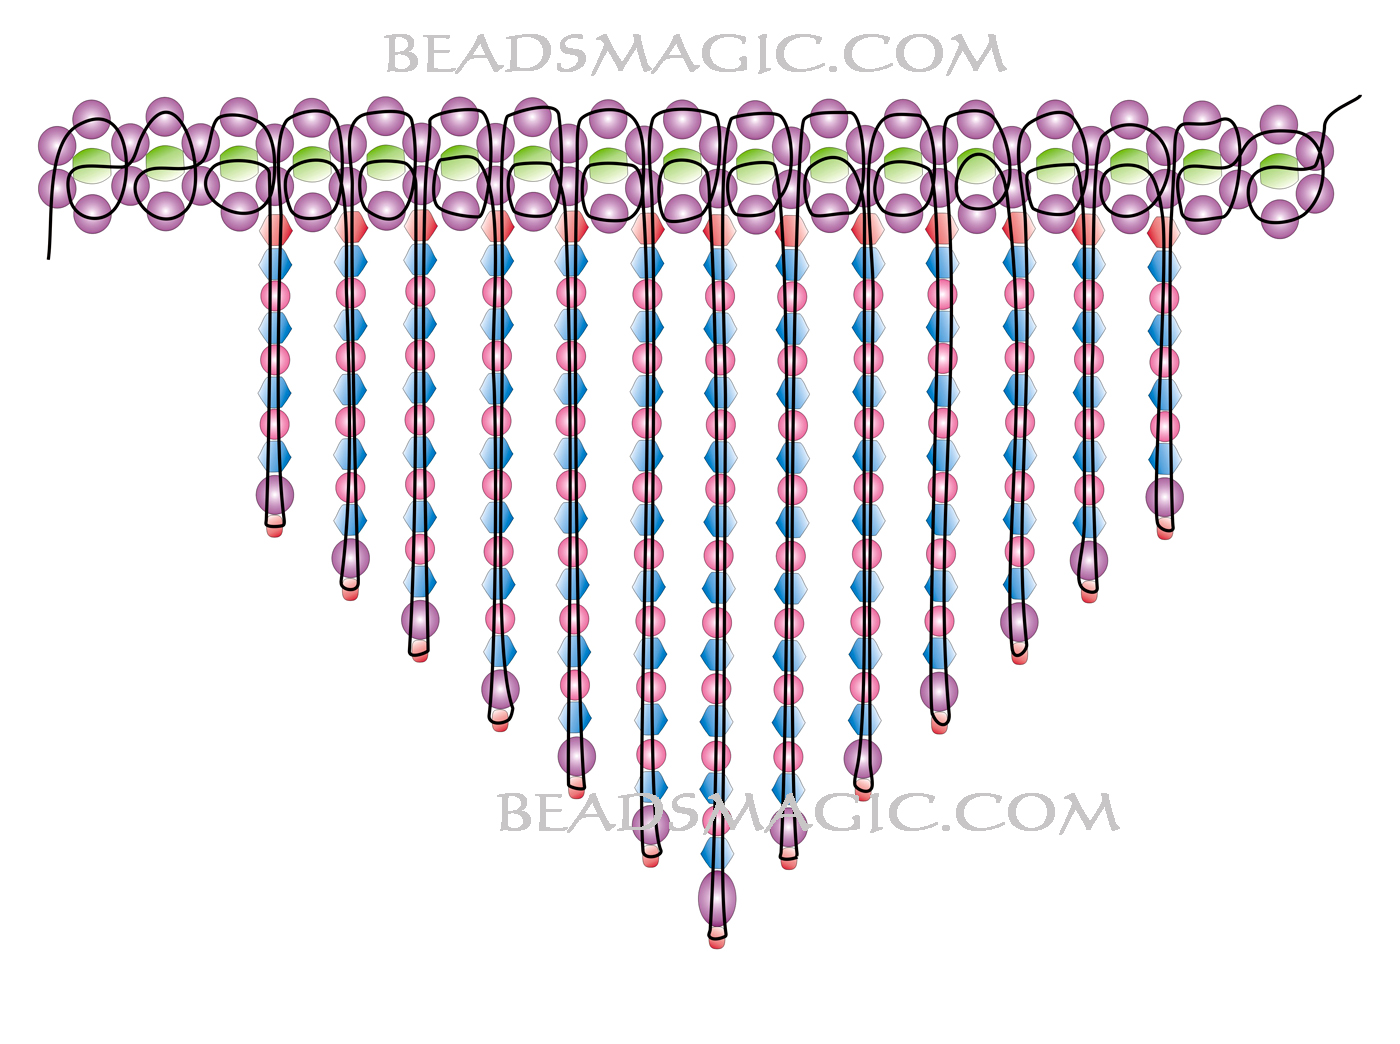 Pattern With Jewelry.: Over 136,204 Royalty-Free Licensable Stock Photos |  Shutterstock